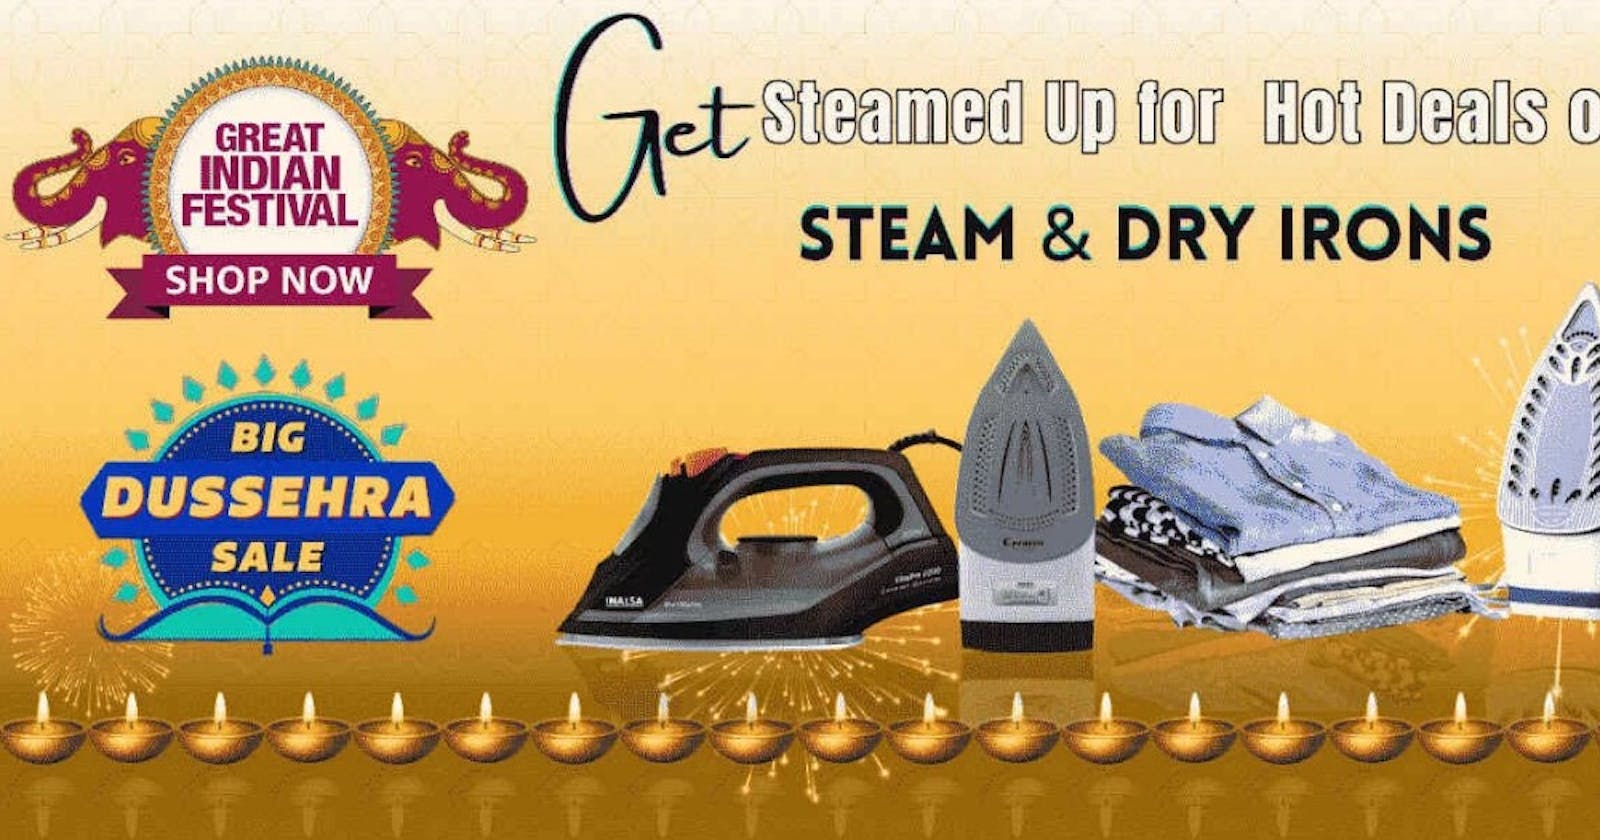 5 Best Unbeatable Steam & Dry Iron Deals: Say Goodbye to Creases!